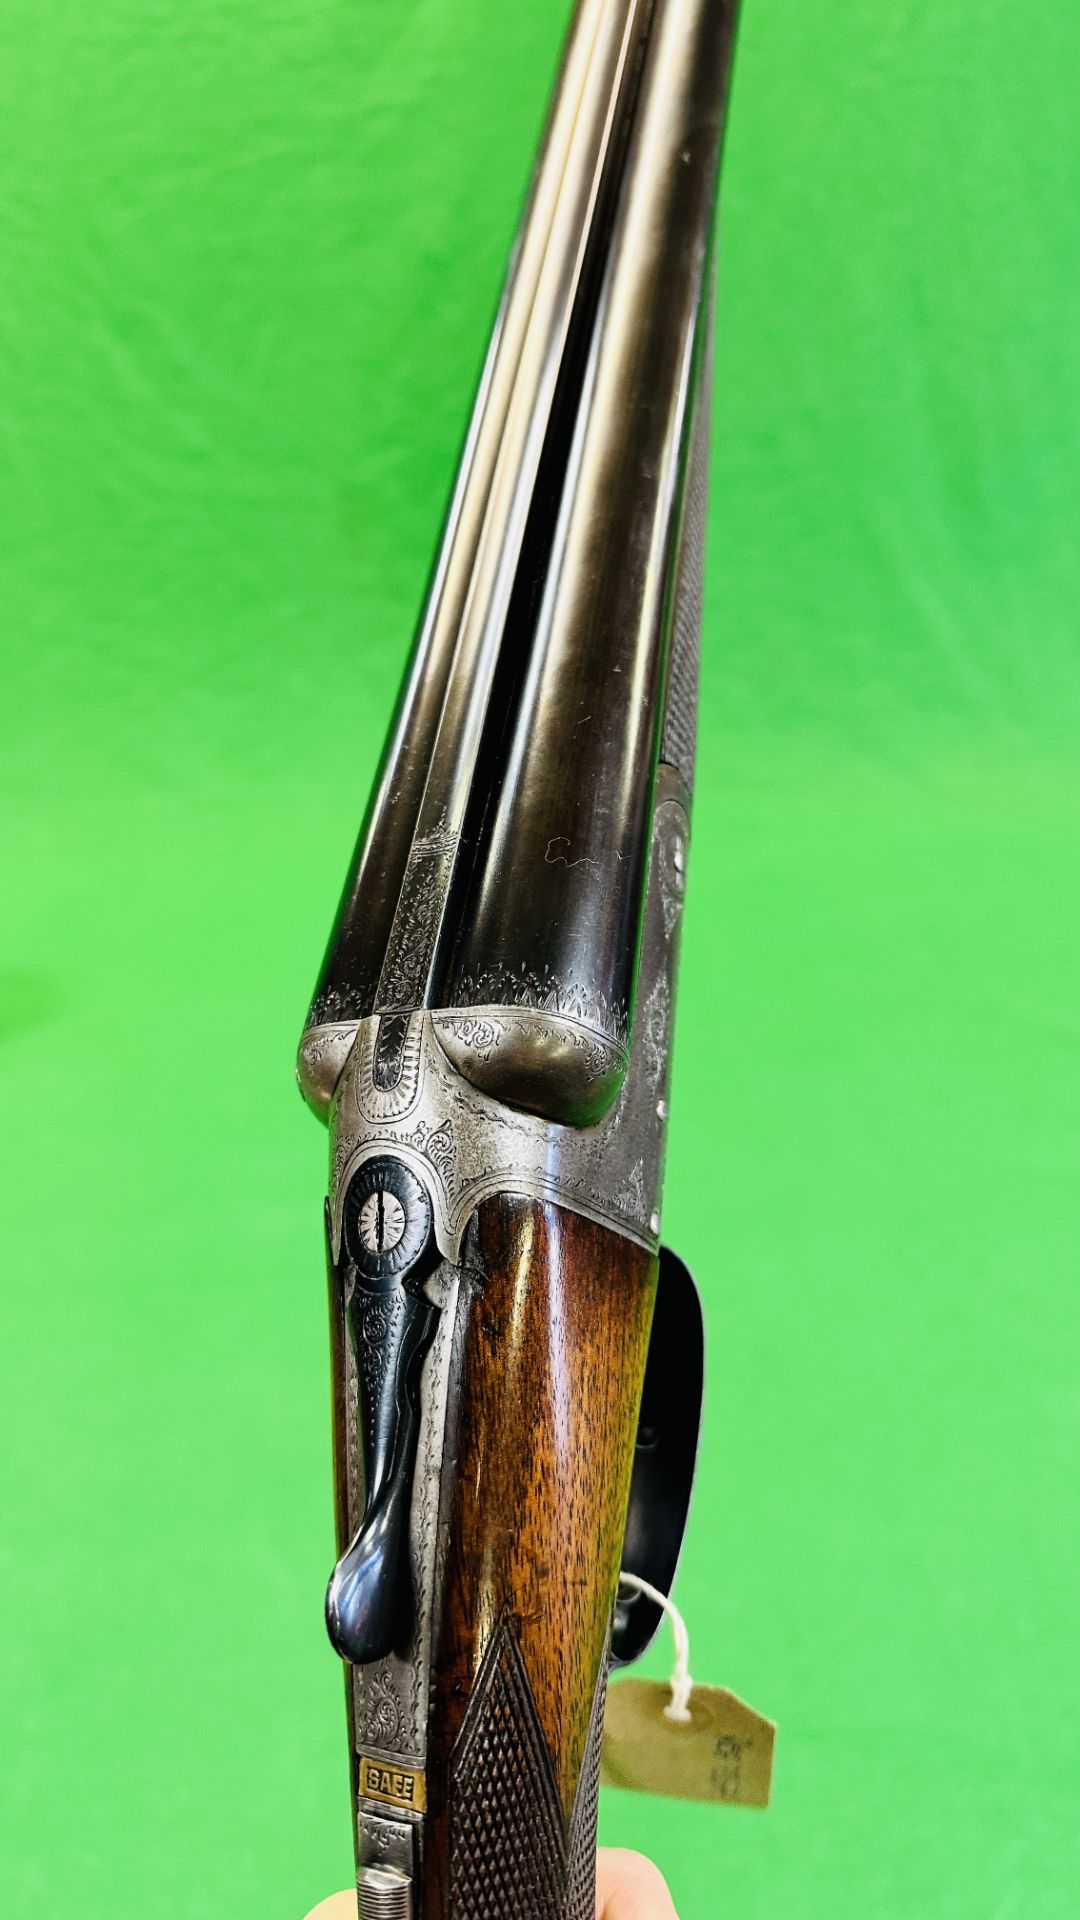 CHUBB 12 BORE SIDE BY SIDE SHOTGUN #1233 (BOXLOCK CYLINDER MECHANISM REPLACED), BSA BARRELS, - Image 14 of 16